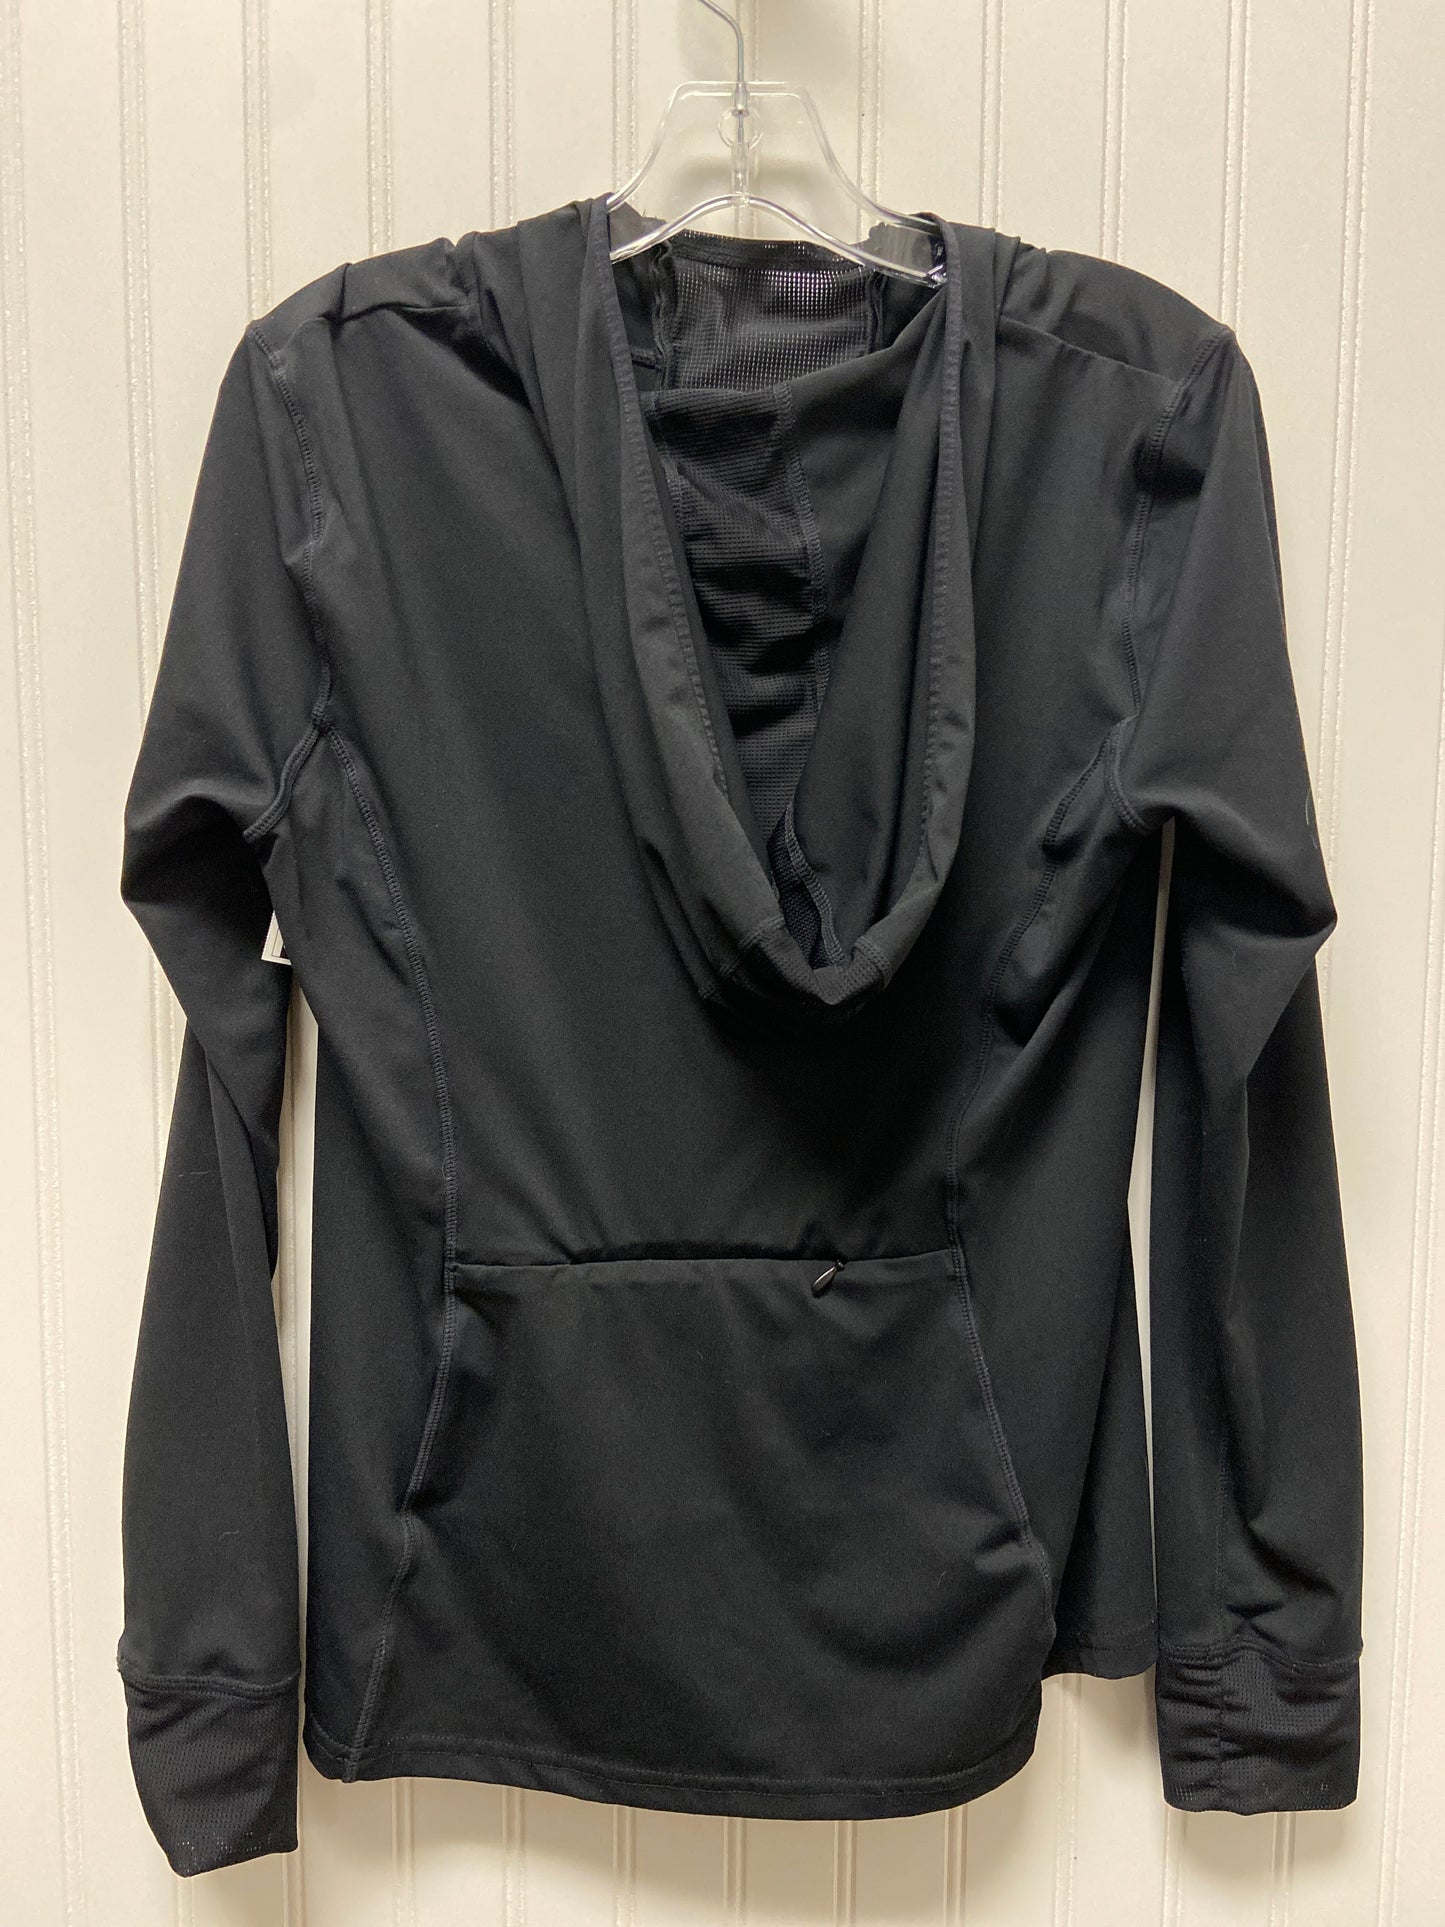 Athletic Sweatshirt Hoodie By Fabletics  Size: L